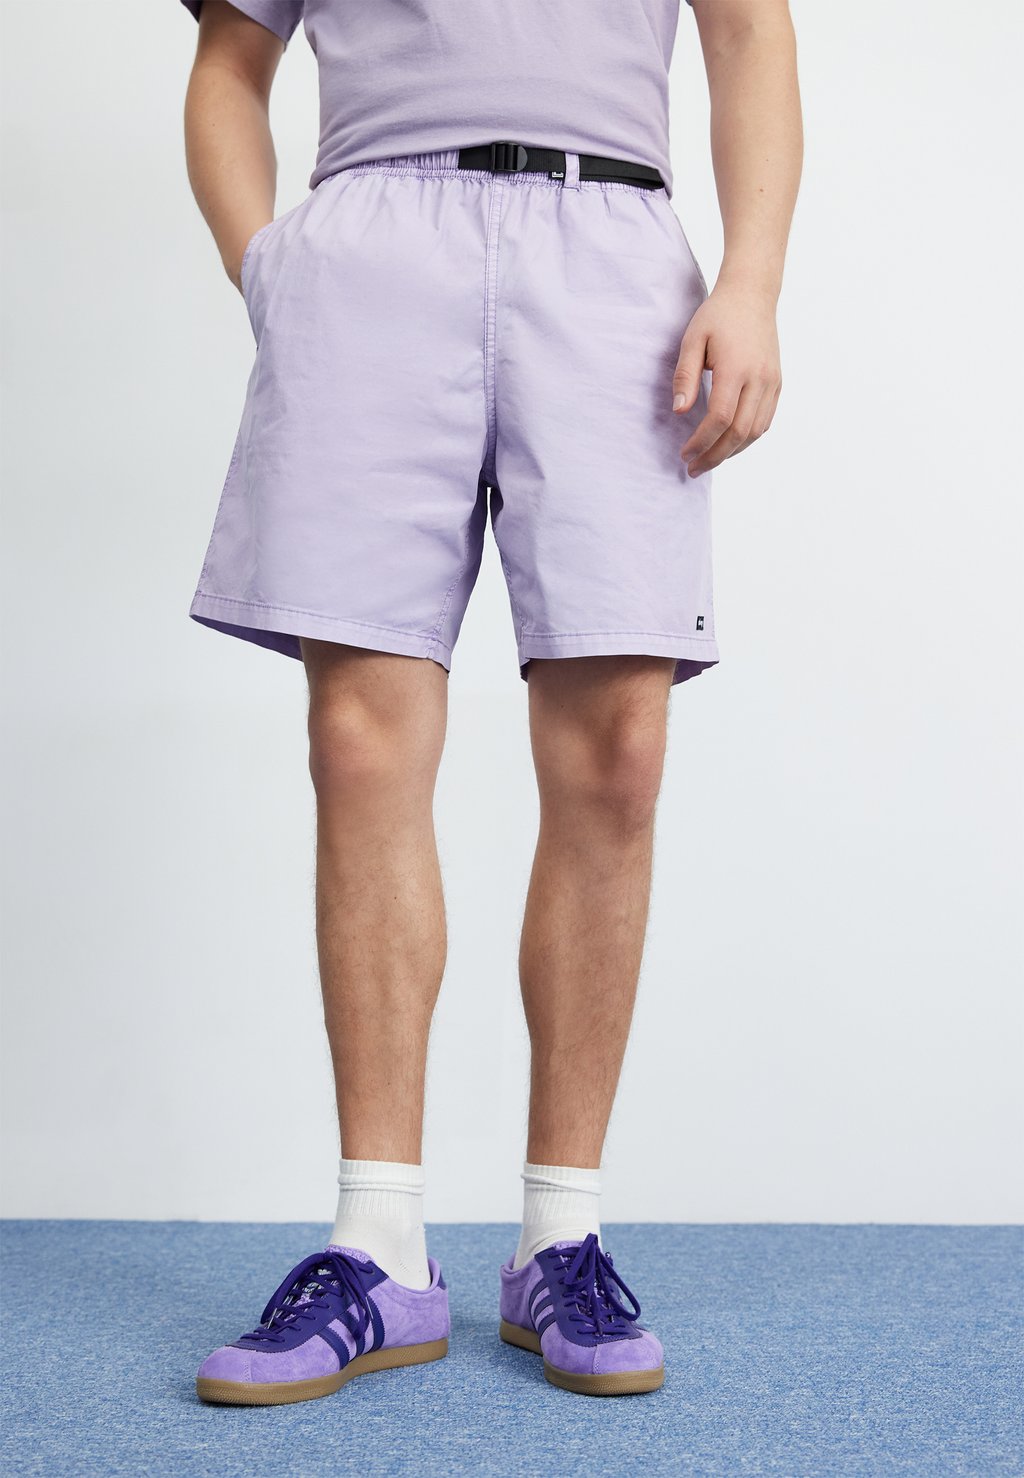 Шорты EASY PIGMENT TRAIL Obey Clothing, цвет pigment orchid petal блузка рубашка pigment sully unisex obey clothing цвет pigment pirouette